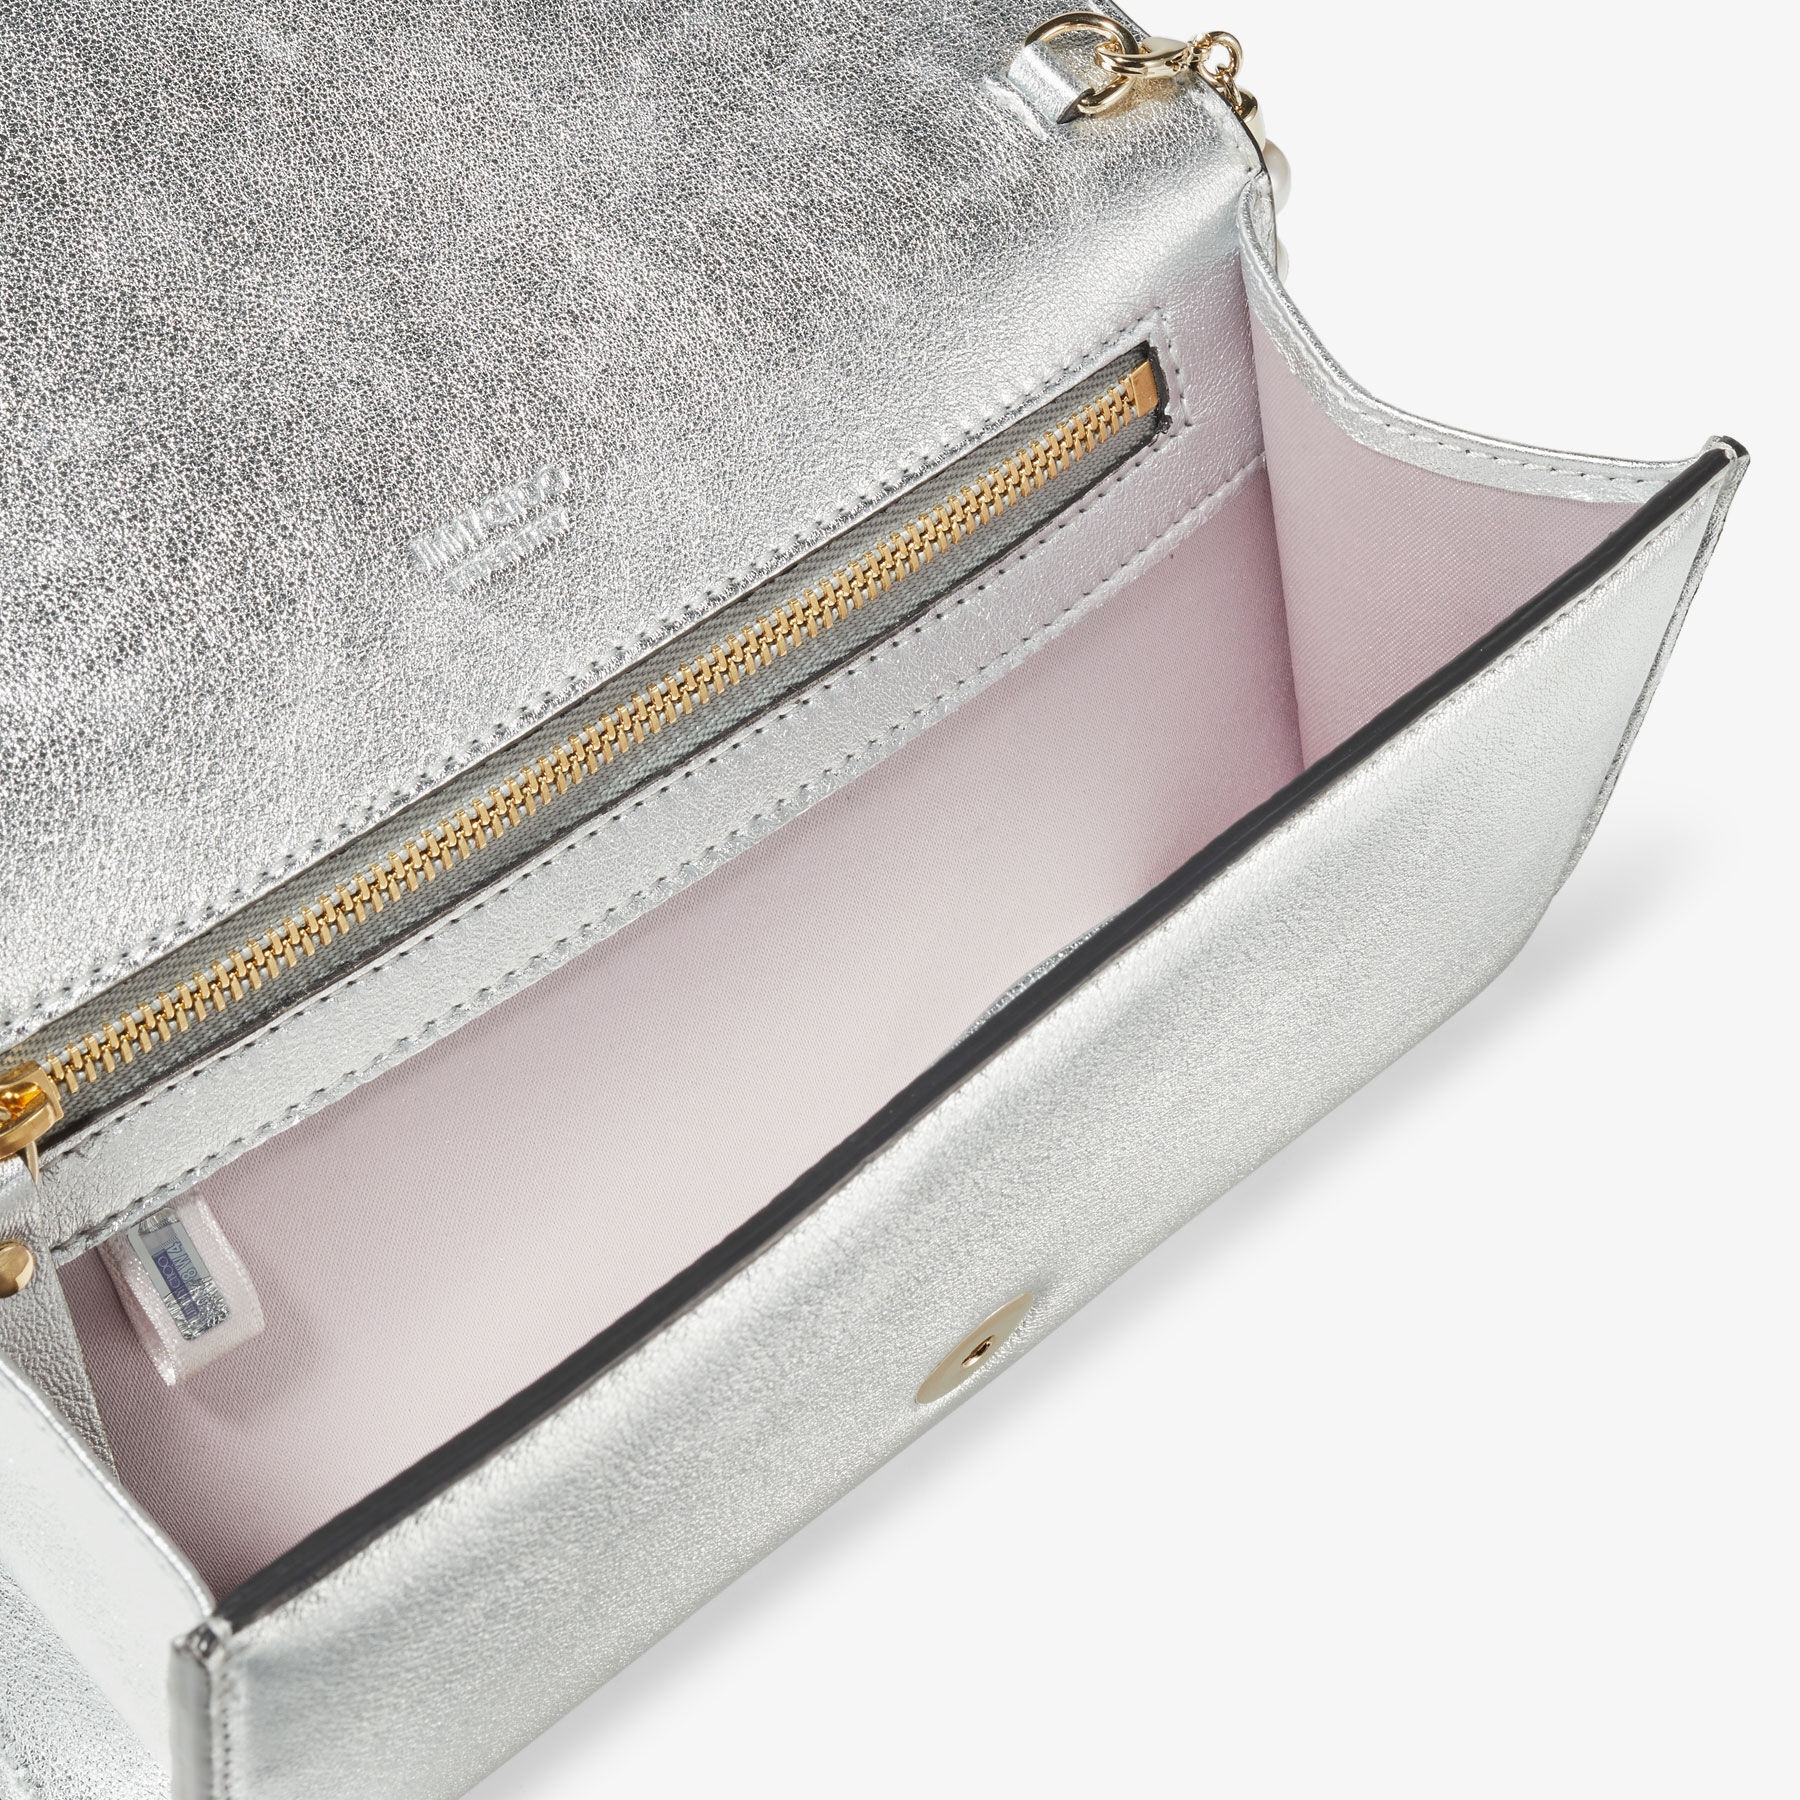 Avenue Wallet W/Chain
Silver Metallic Nappa Leather Wallet with Pearl Strap - 6